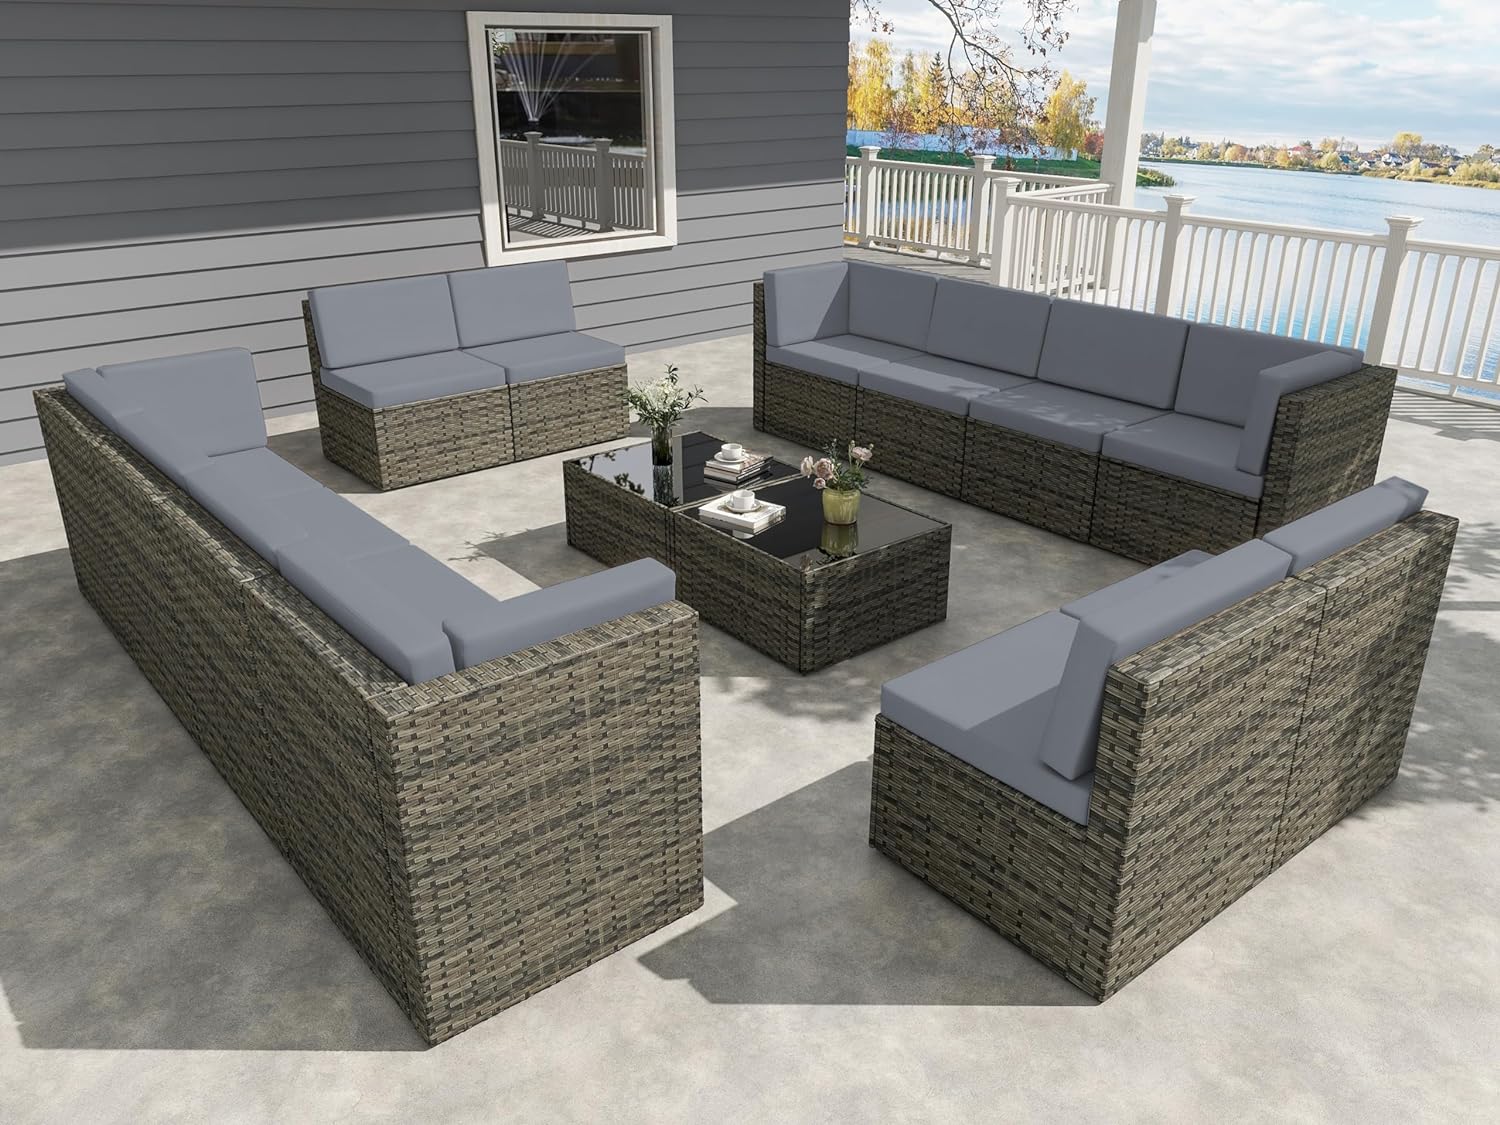 UIXE 14 Pieces Patio Furniture Sets Outdoor Sectional Sofa, All Weather PE Rattan Lounge Seating Couch Backyard Wicker Modular Chairs Conversation Set with 12 Person Seats Group, Gray